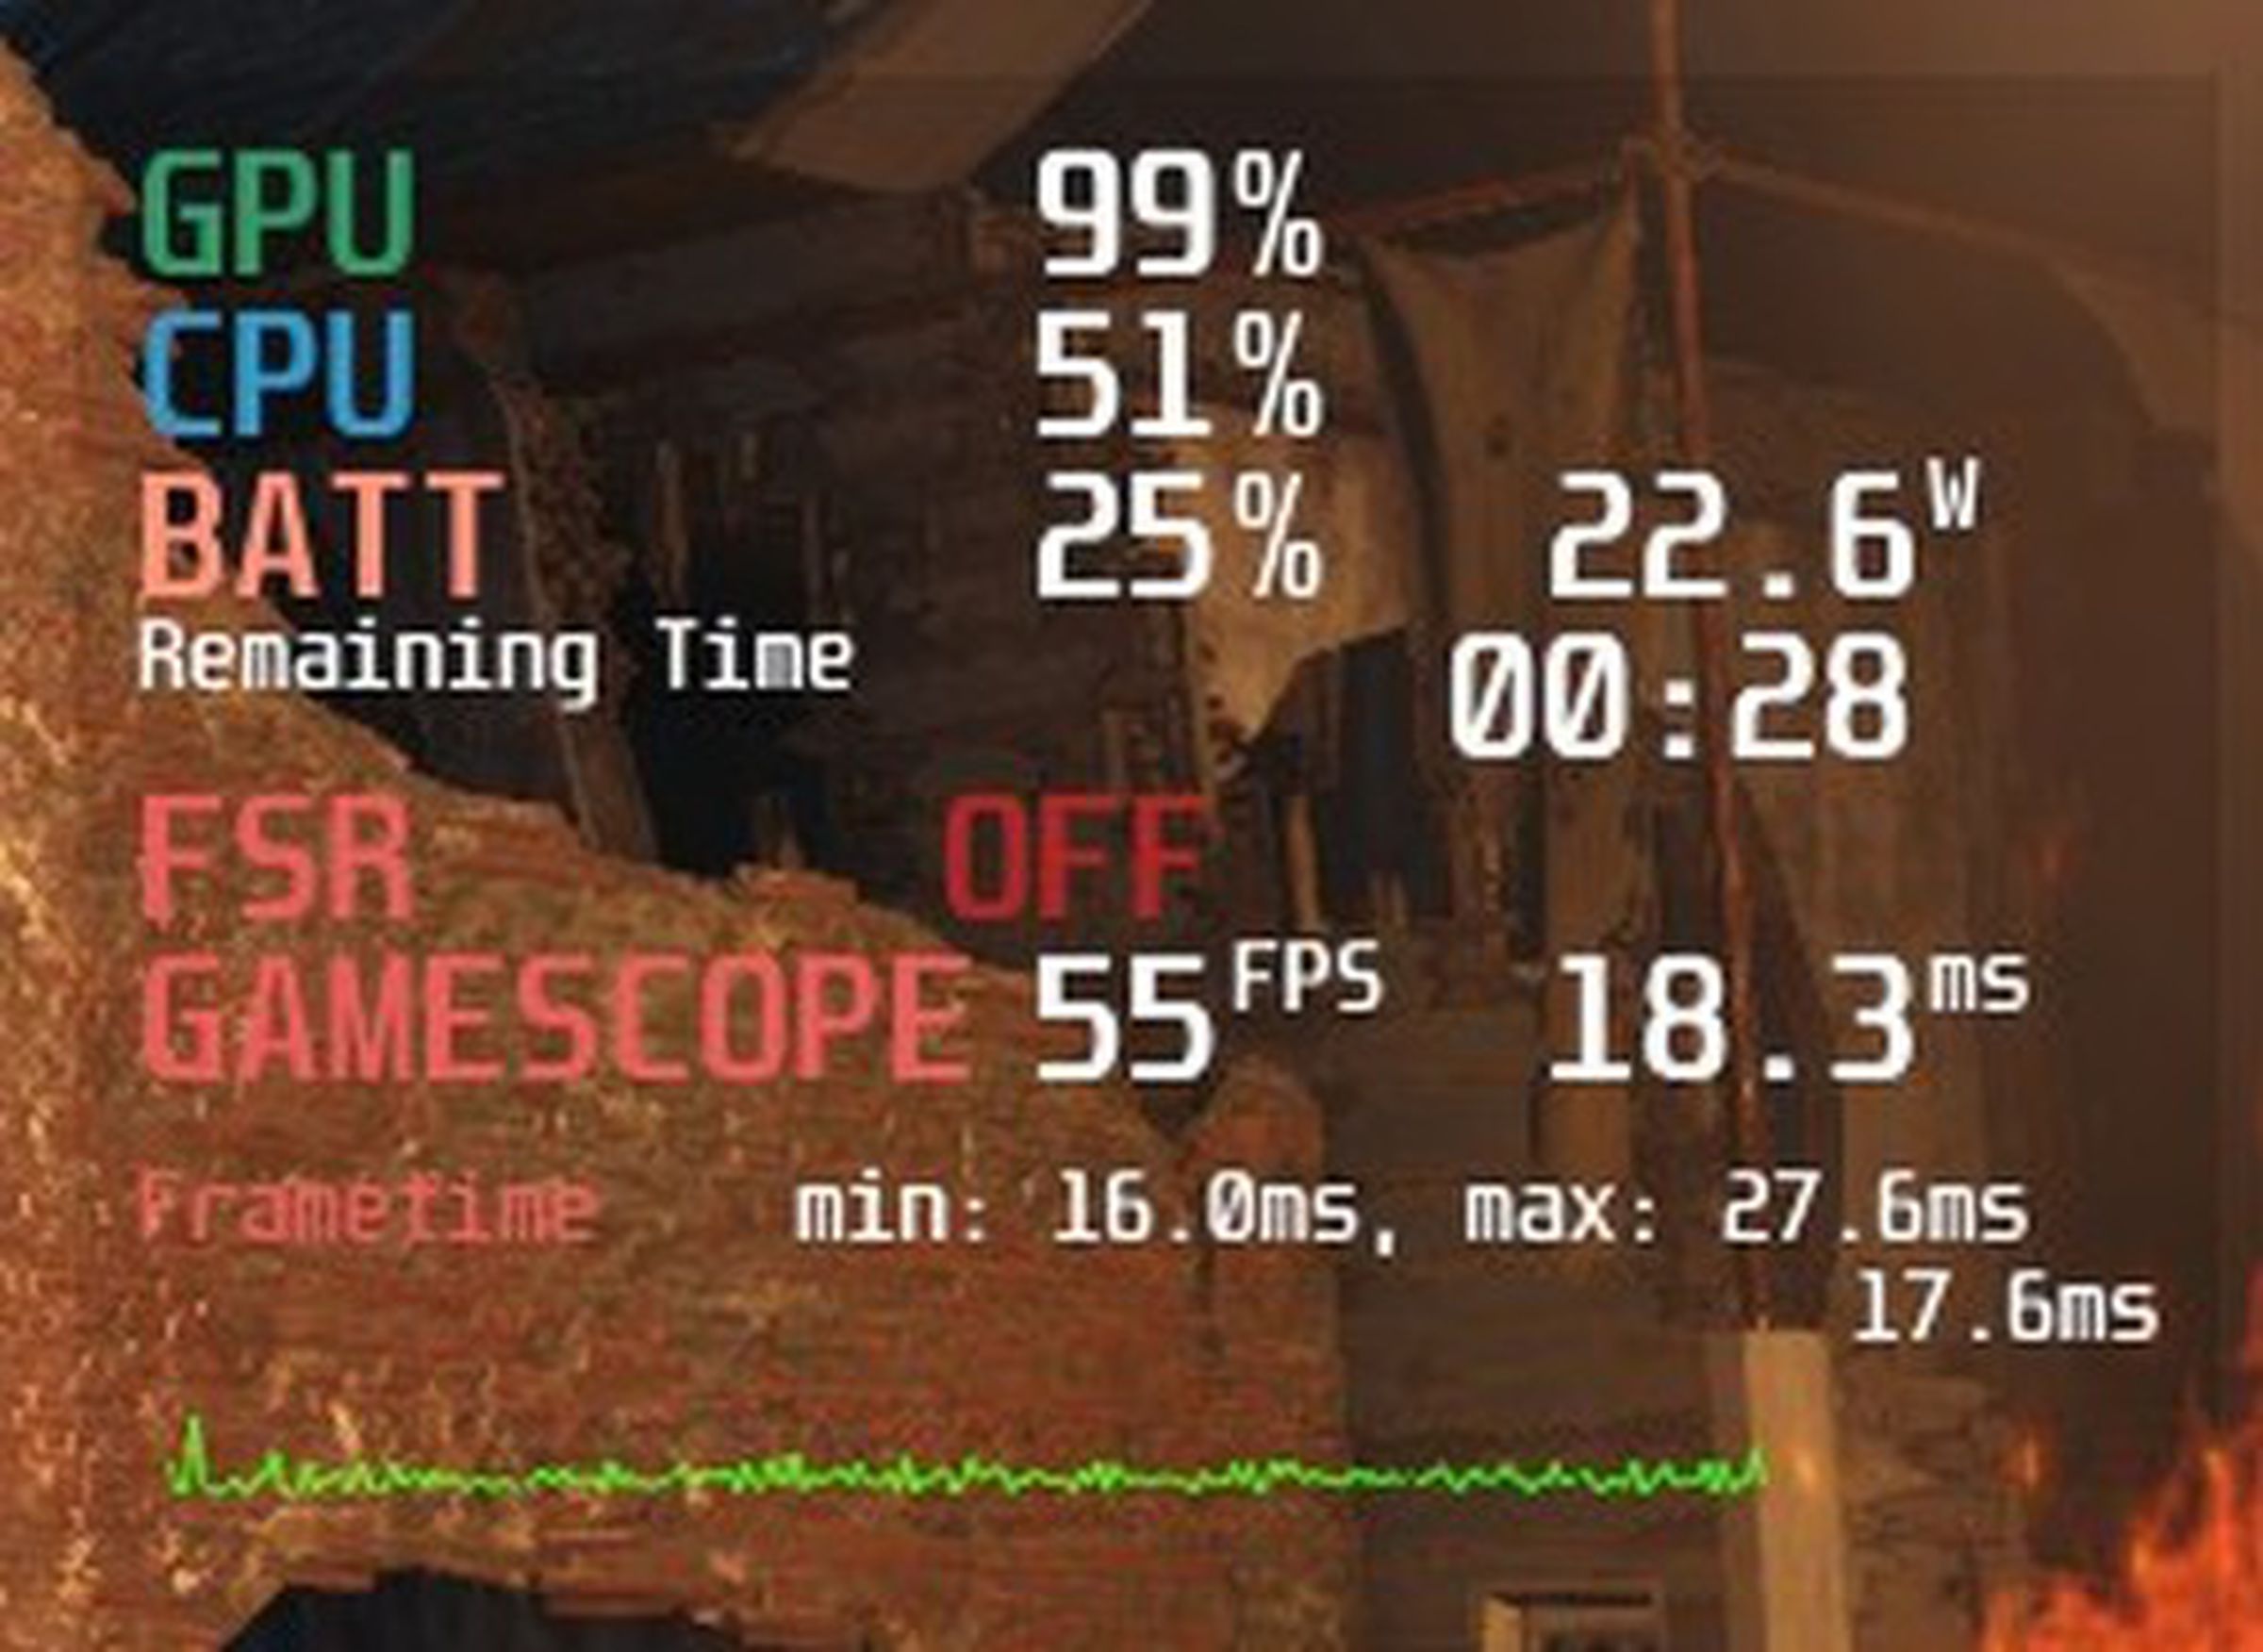 With 25 percent battery remaining, Fallout 4 is drawing 22.6 watts, giving me, at most, 28 minutes before I need to plug in... or I can extend it by throttling frame rate.